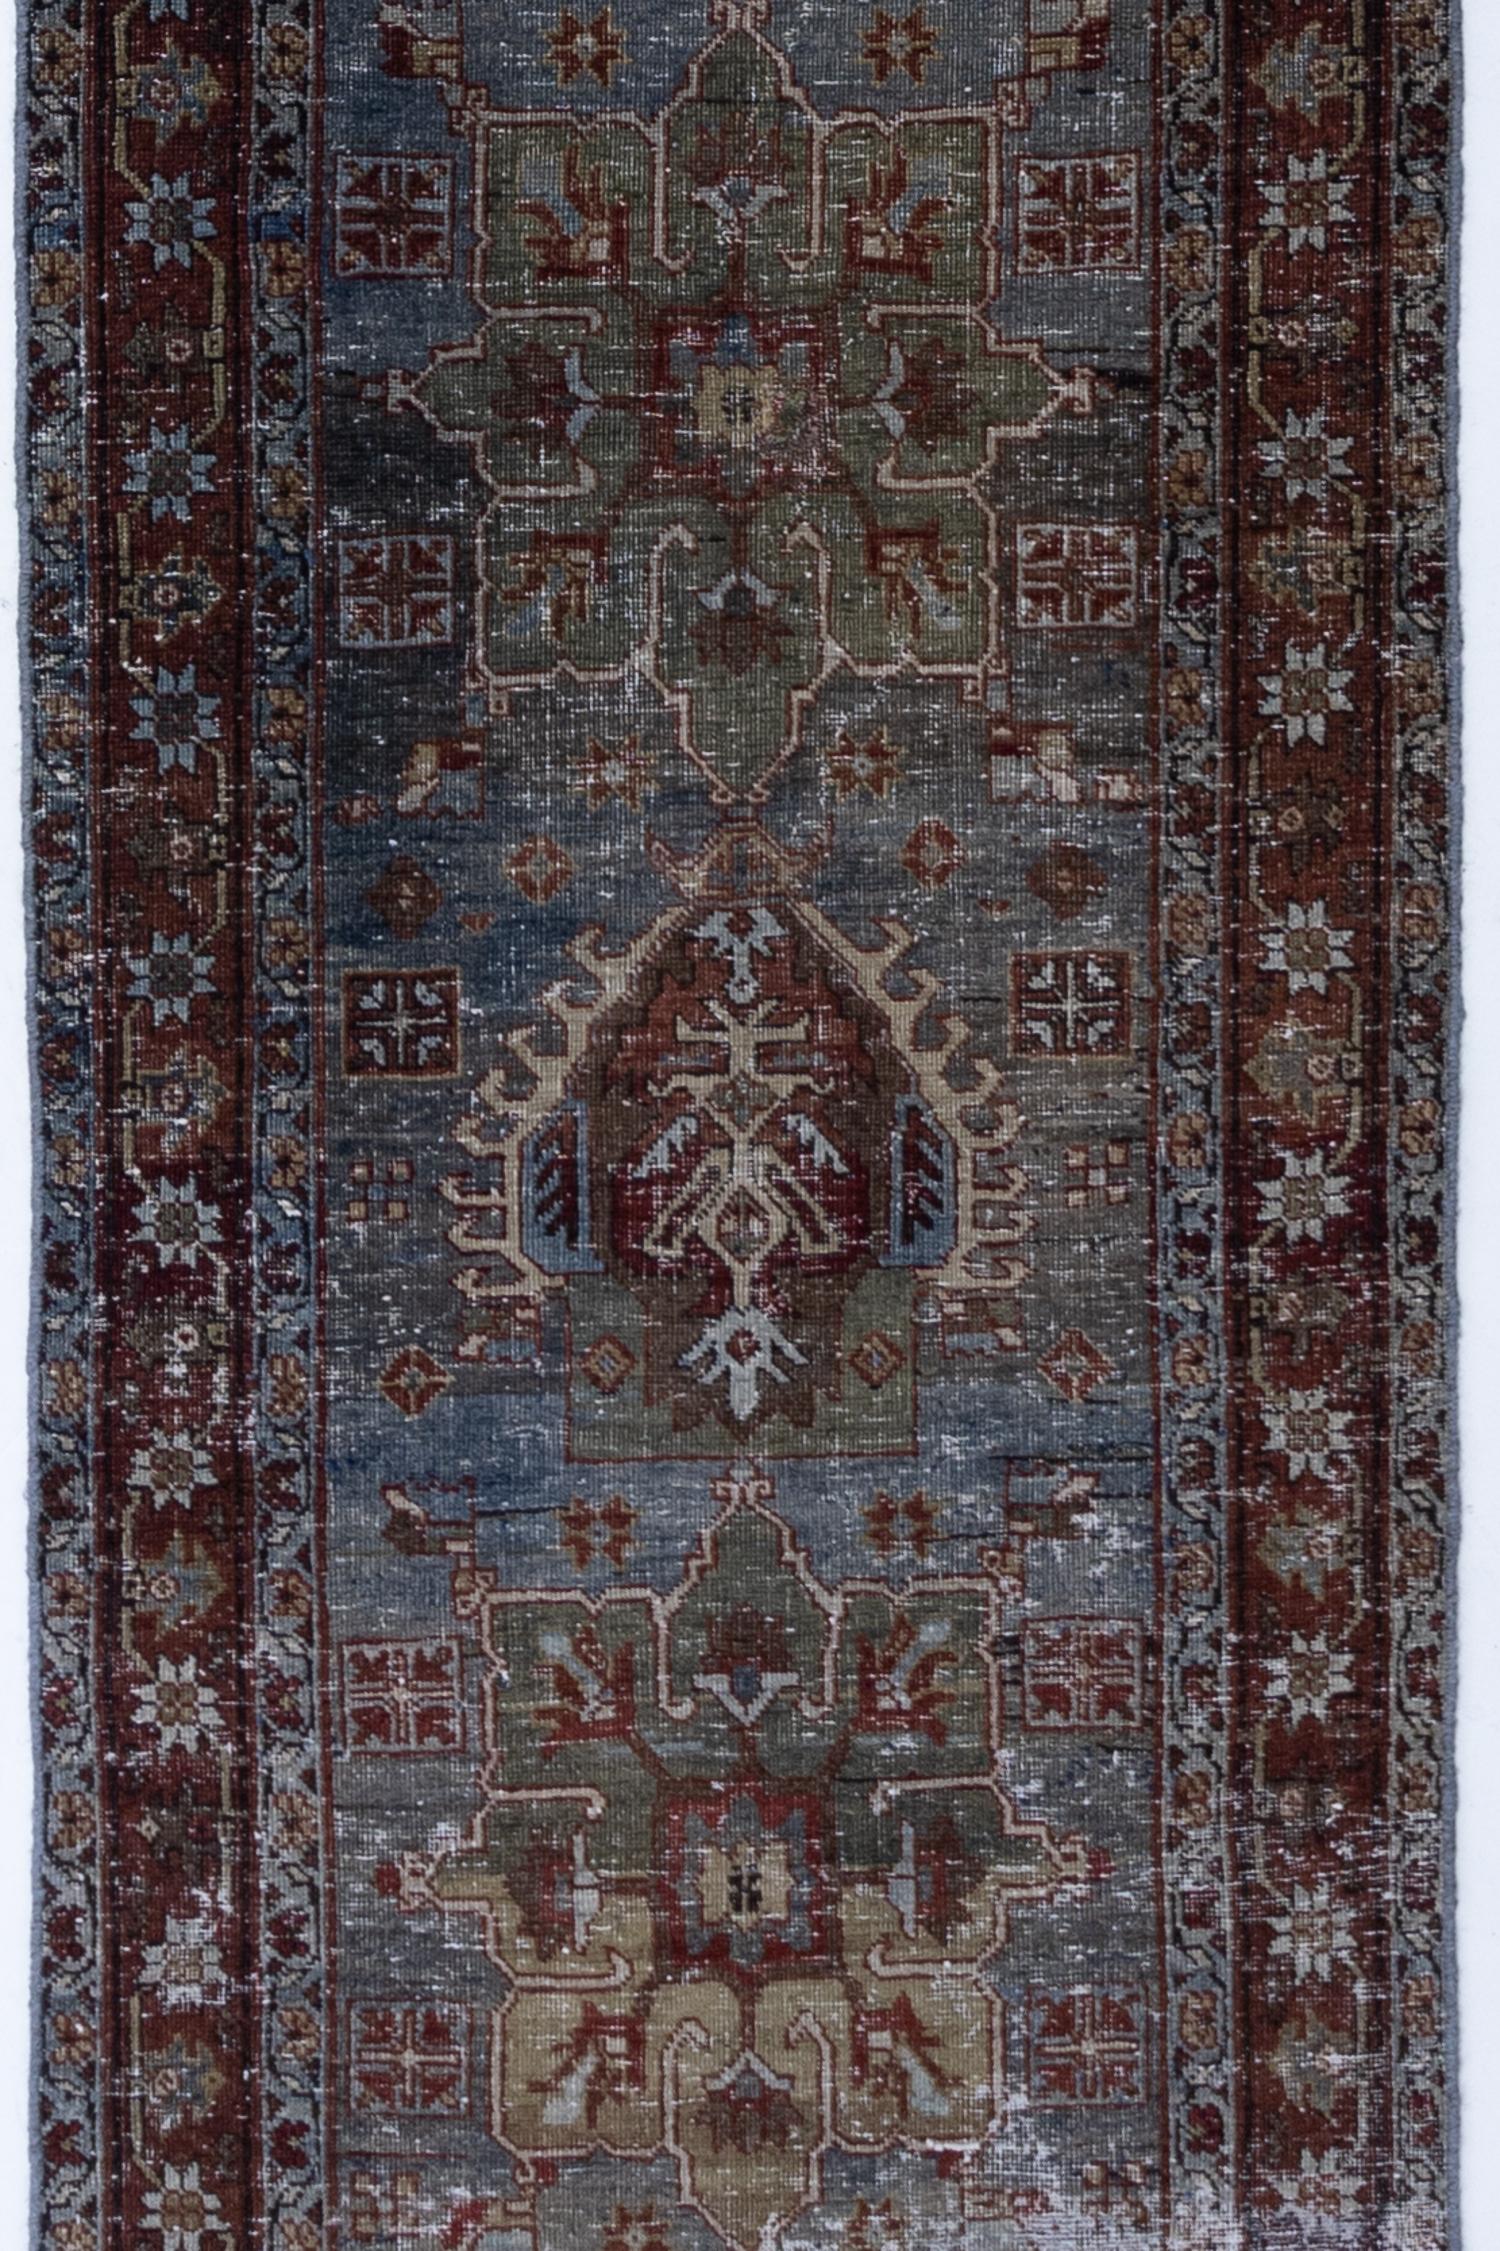 Colors: deep blue, crimson, green, gold

Pile: low

Antique Persian rug with moody jewel tones and beautiful distressing. Low pile with a study heavy weight feel that is safe for high traffic despite the distressing.

Wear Notes: 7

Wear